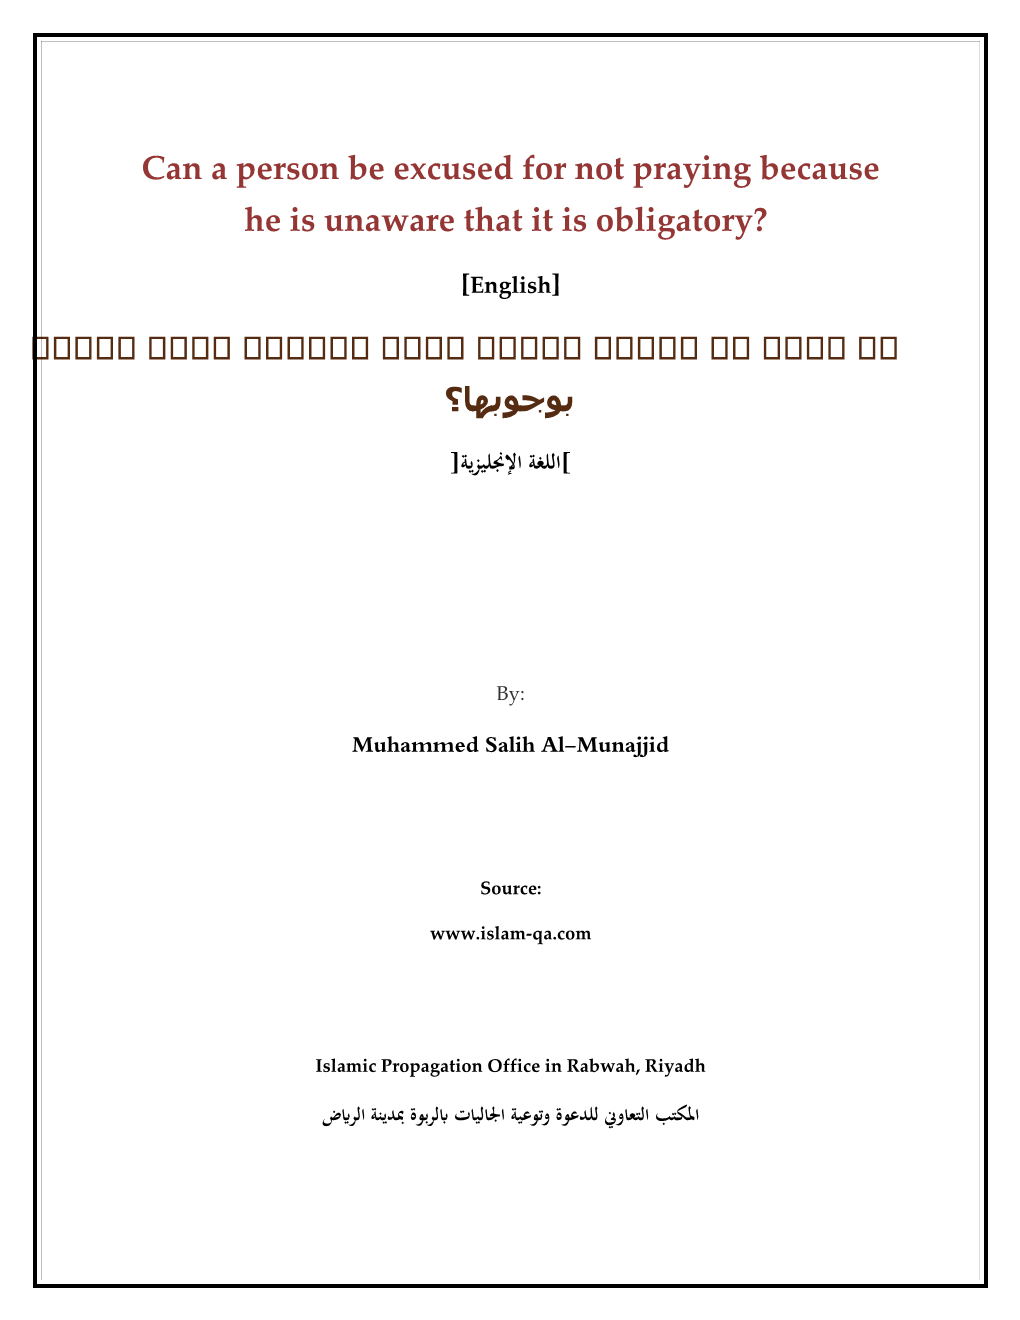 Can a Person Be Excused for Not Praying Because He Is Unaware That It Is Obligatory?